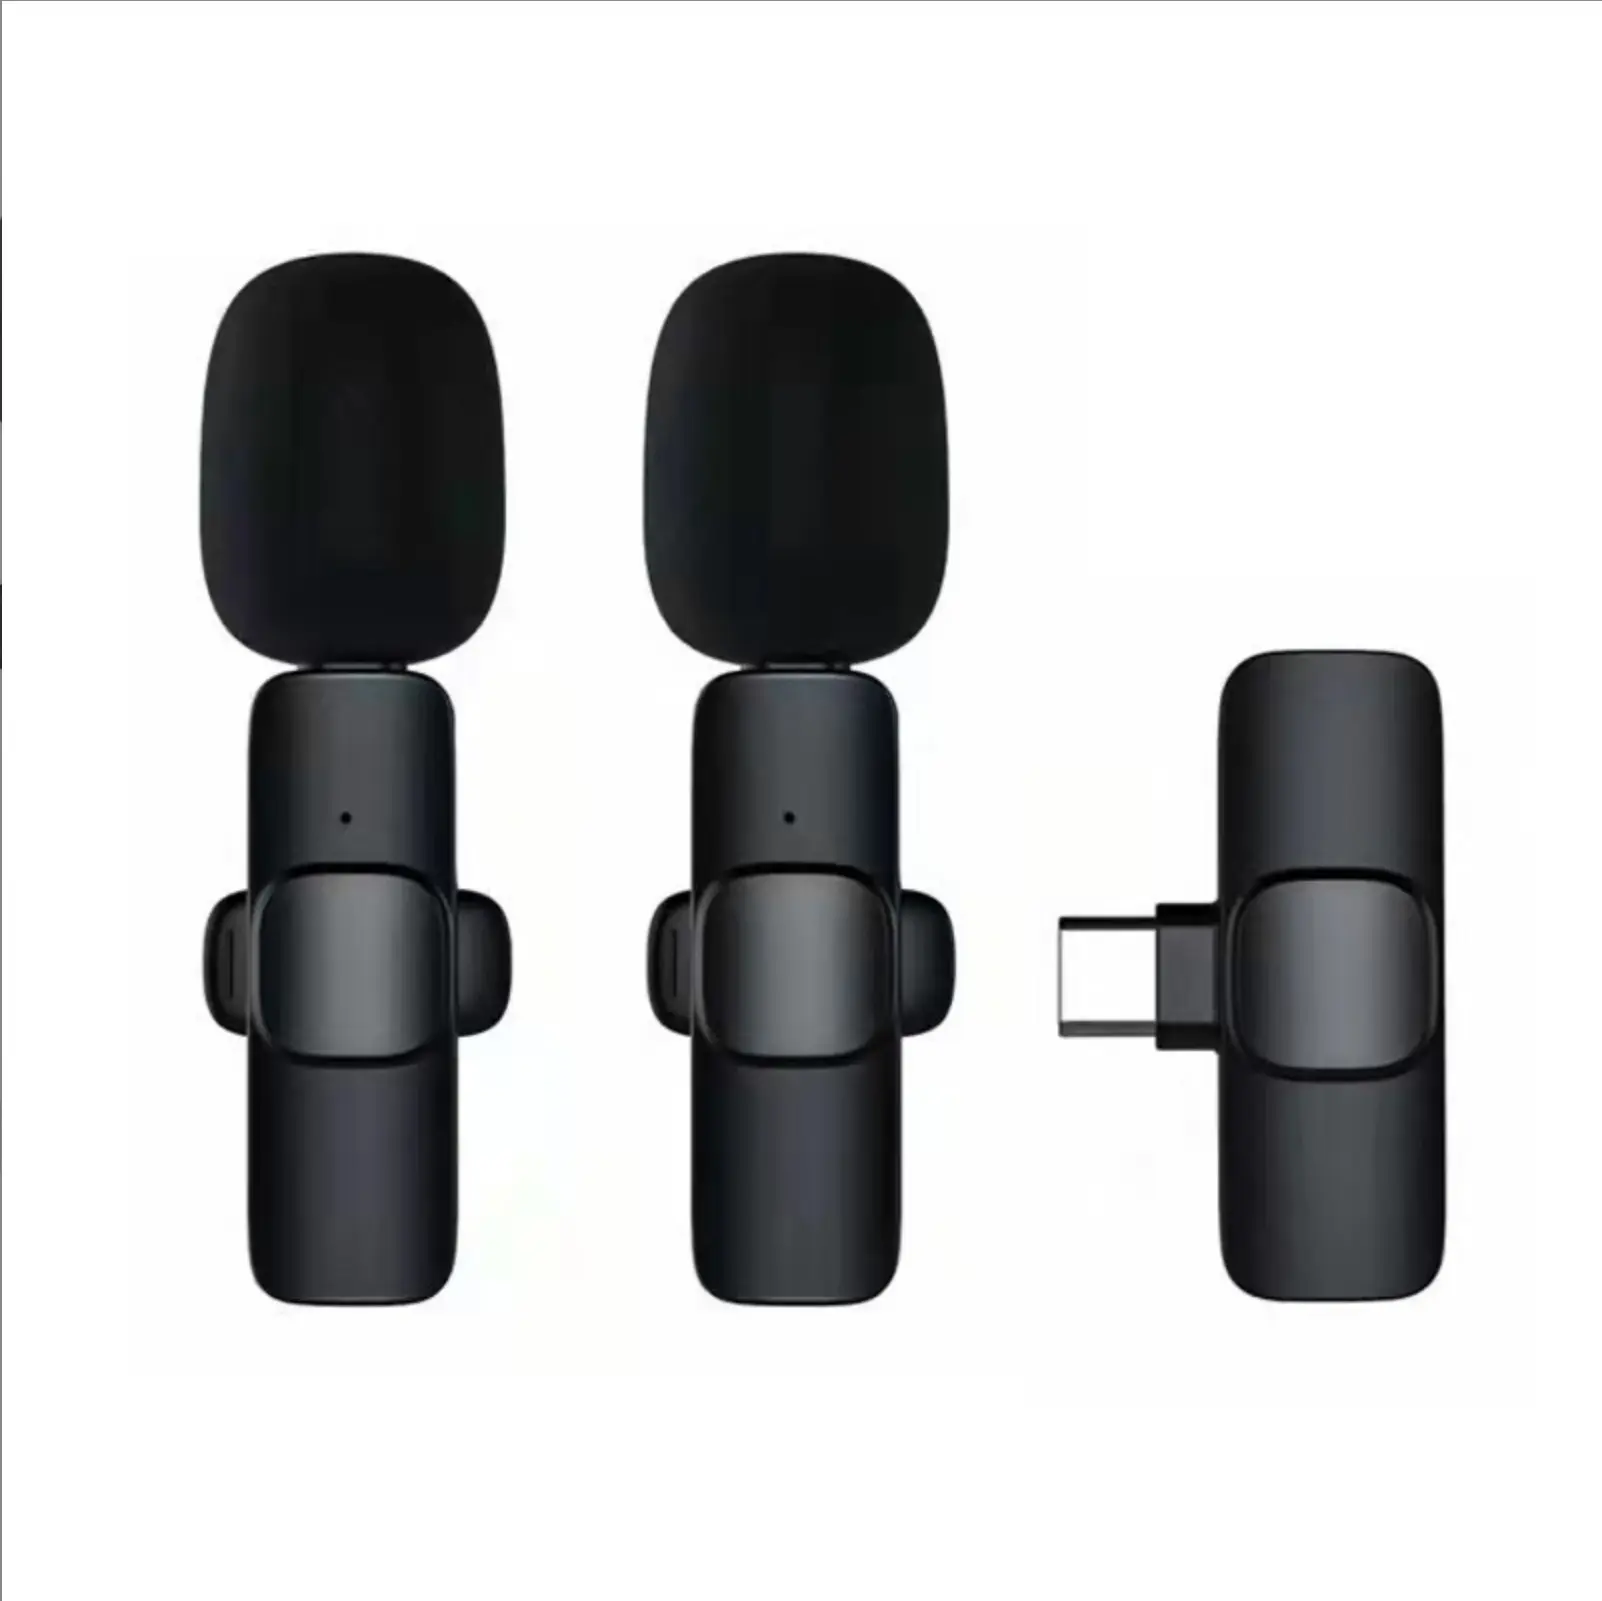 2022 1 Drag 2 active noise-canceling wireless lavalier microphone for outdoor life recording, microblogging, live streaming